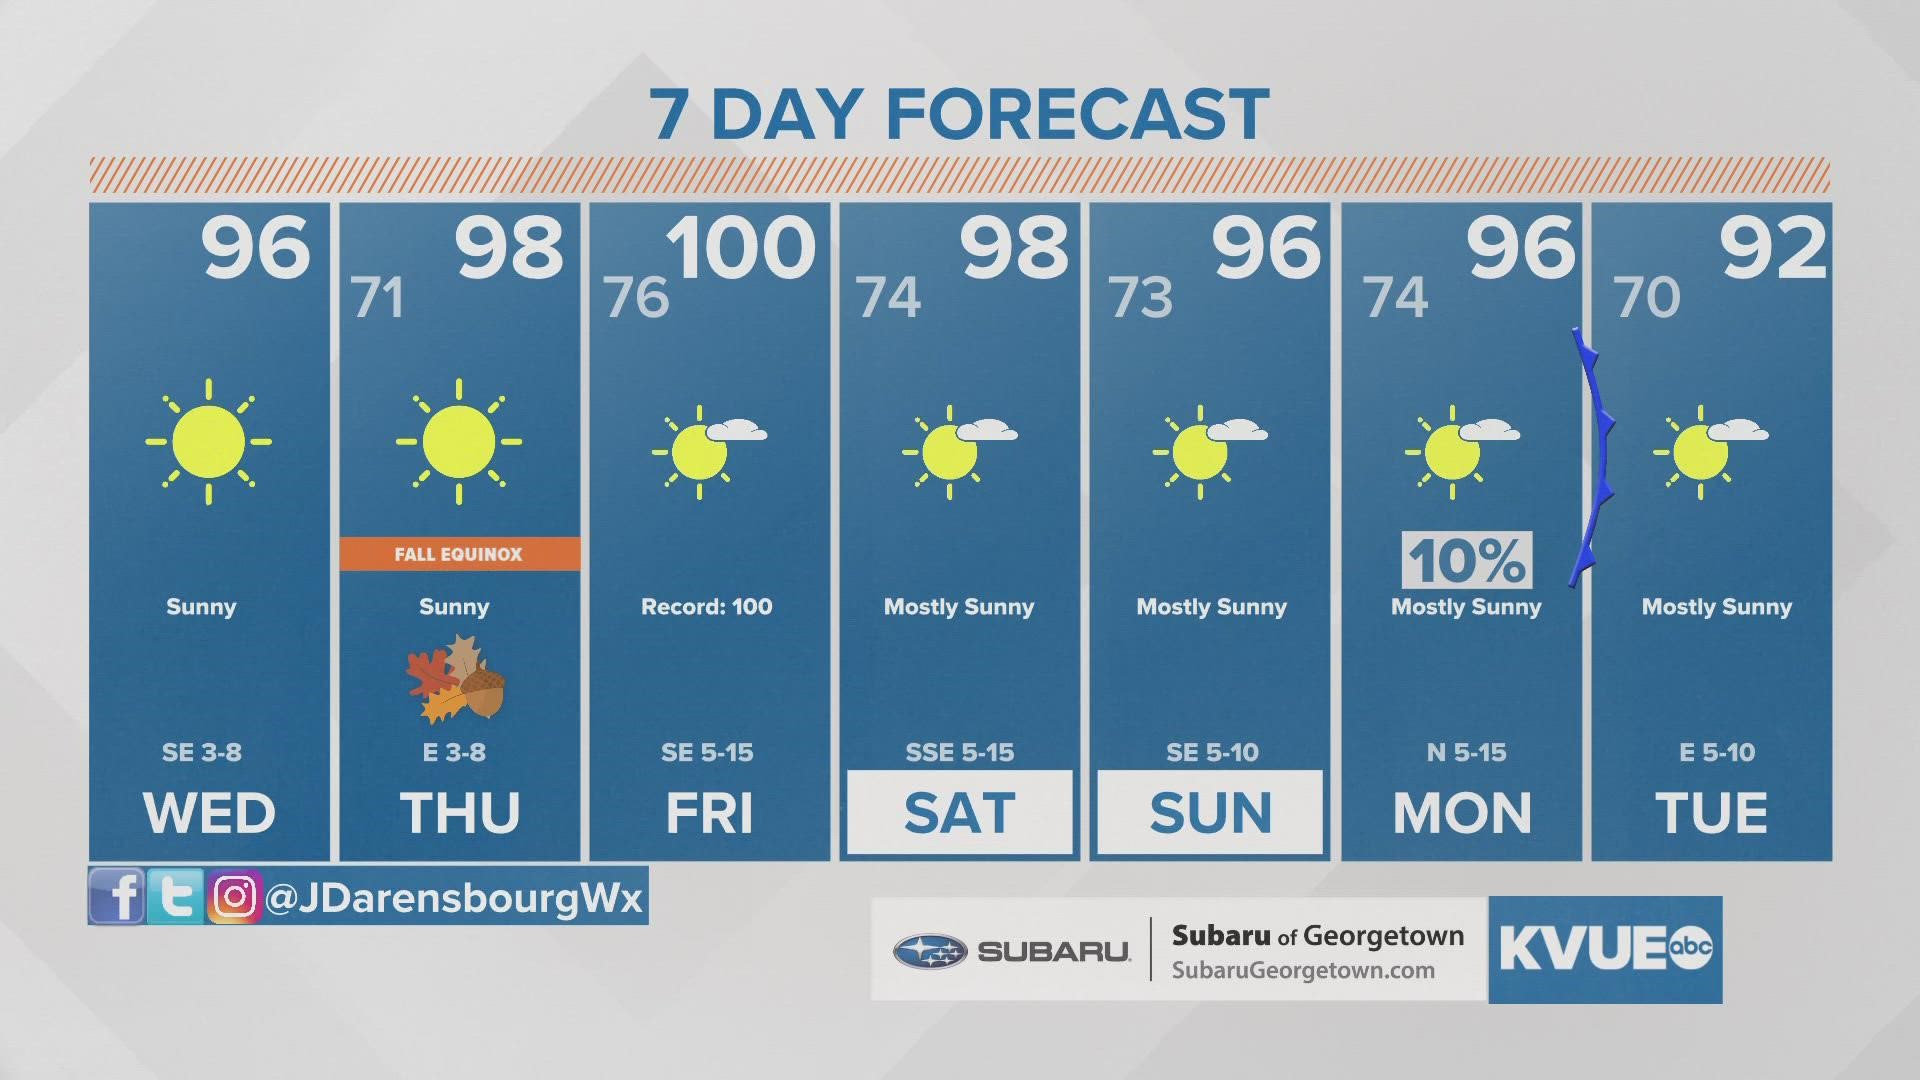 Heat builds with triple digits likely by Friday